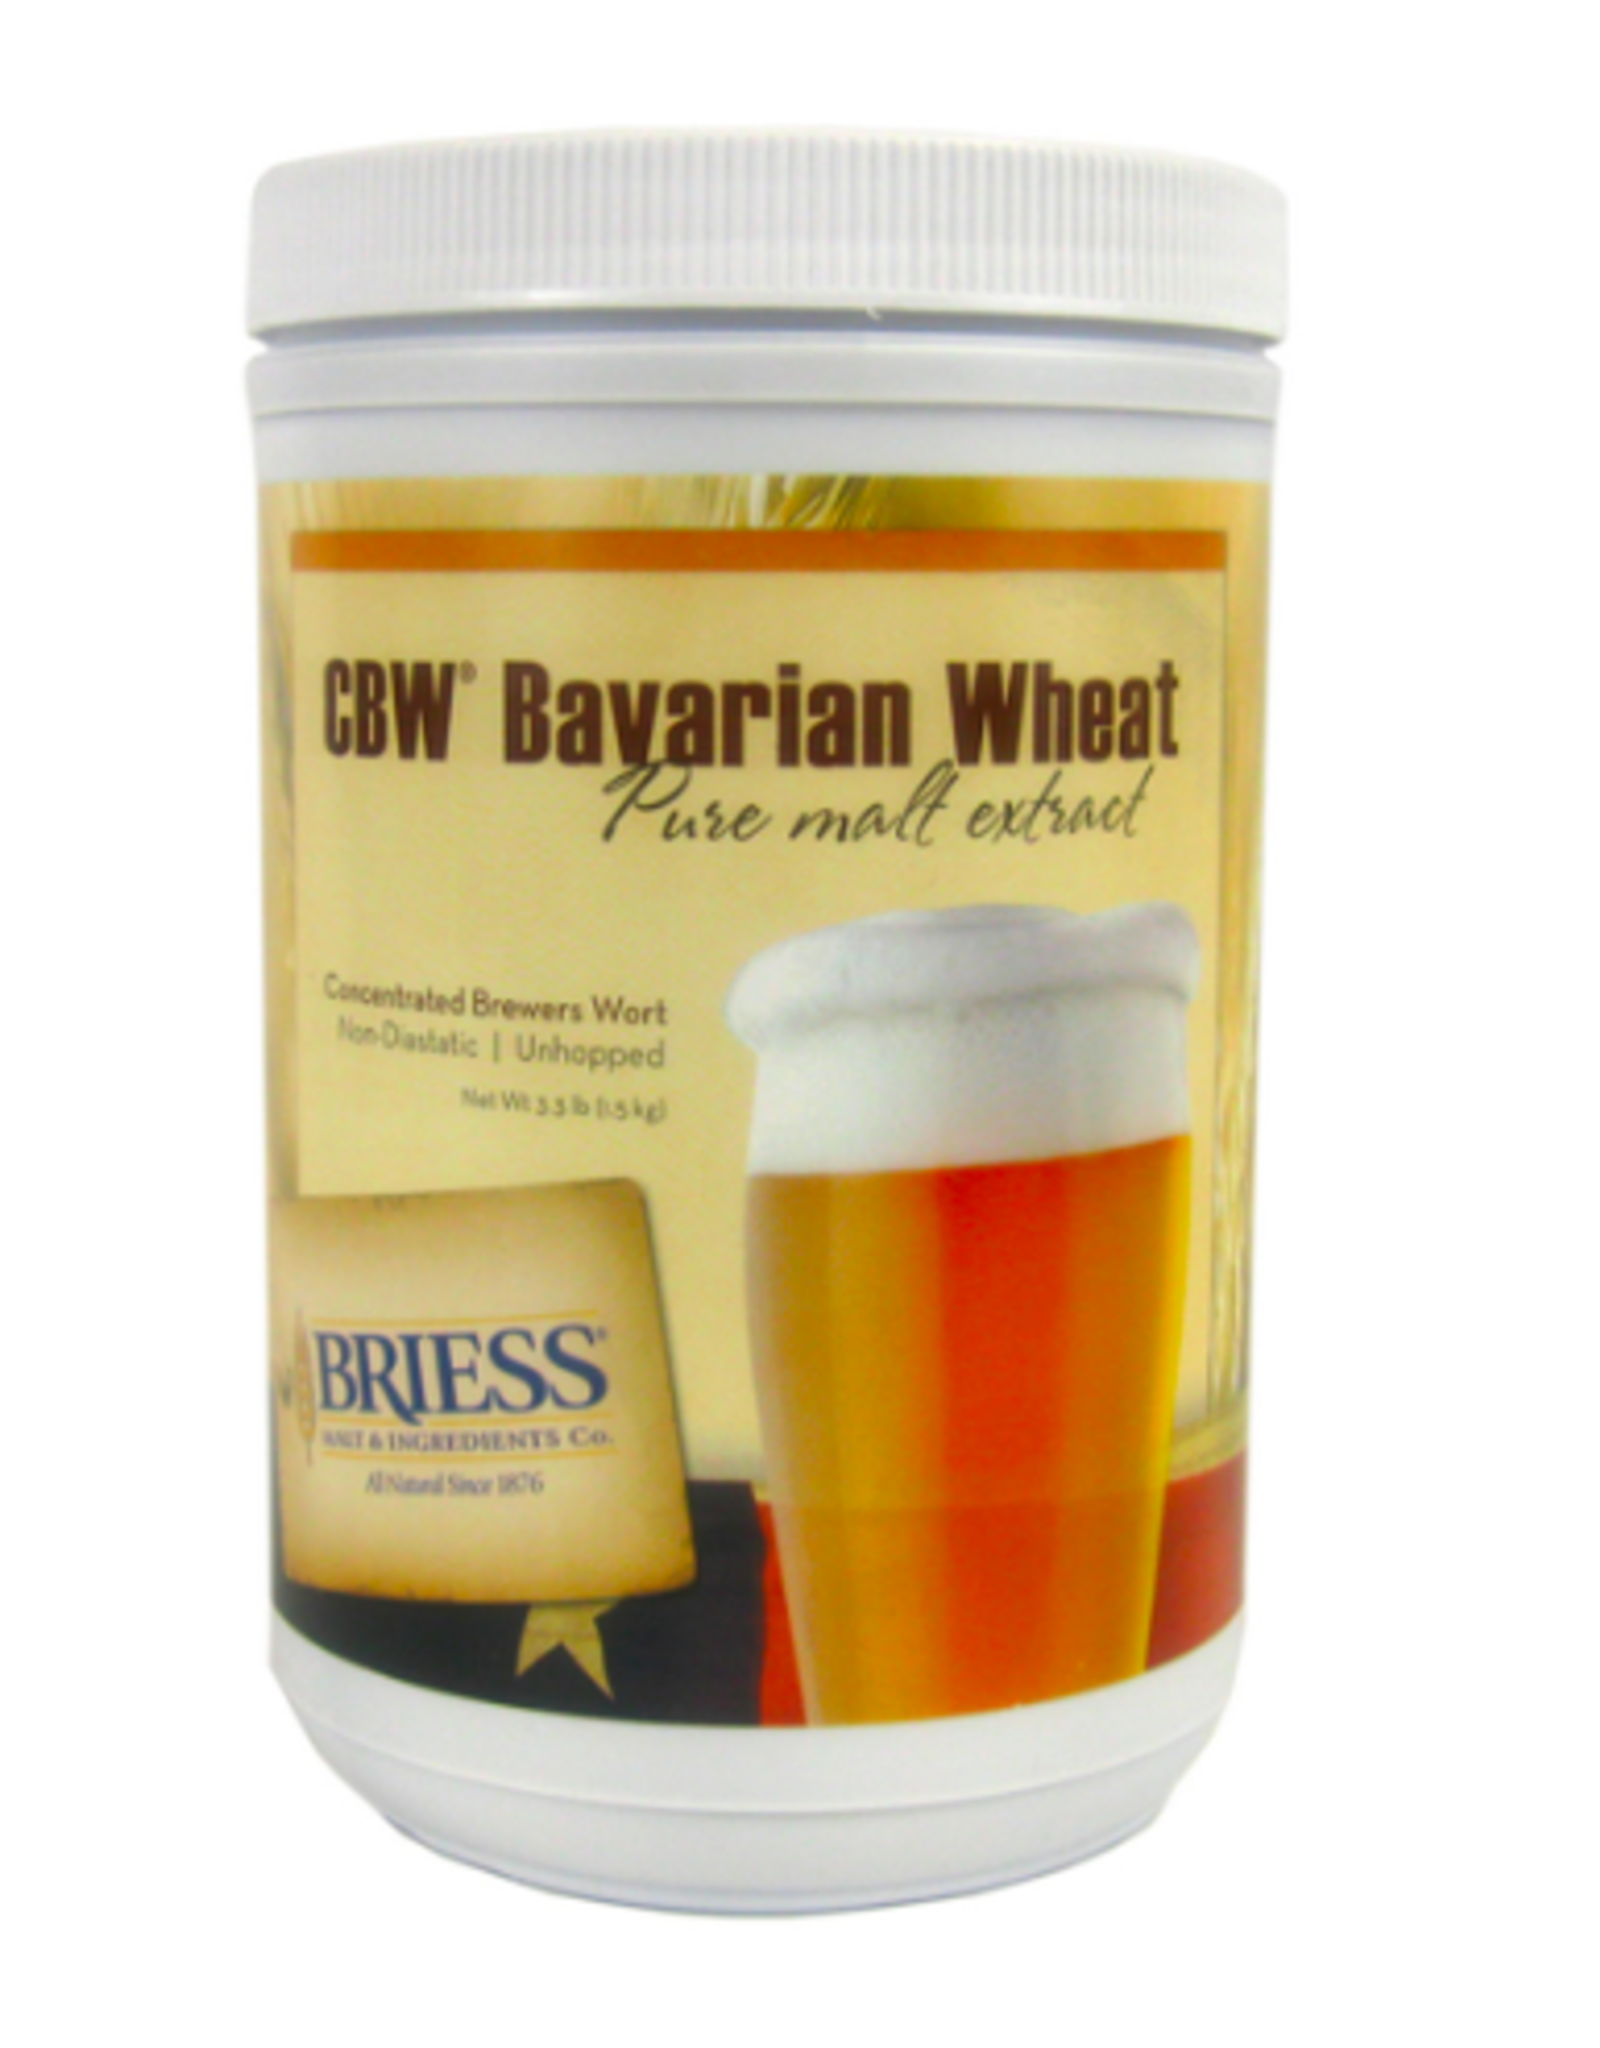 BRIESS BAVARIAN WHEAT CANISTER 3.3 LB